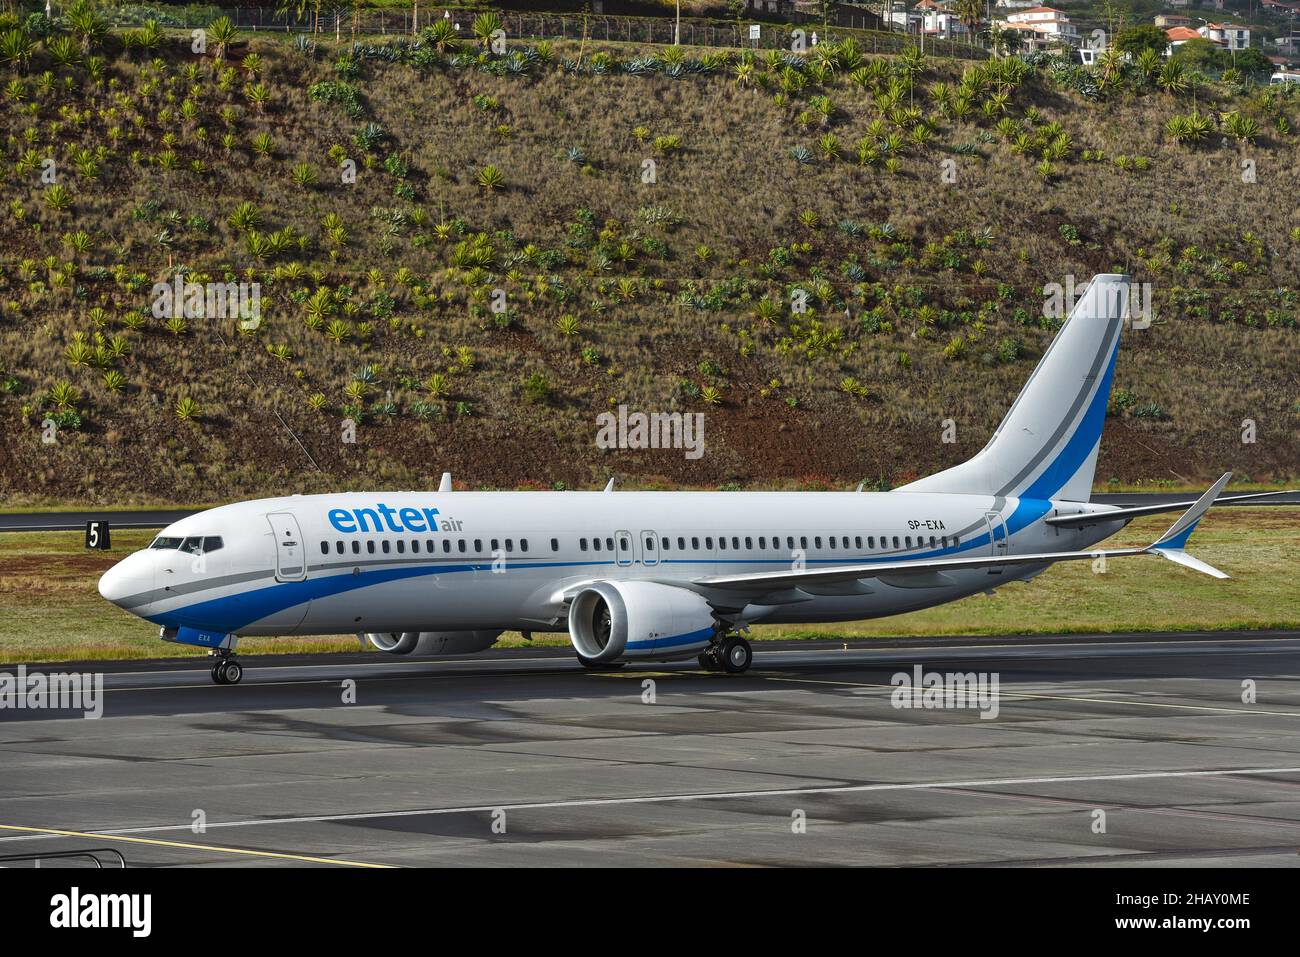 ENTER Air Plane getting ready for take-off at Funchal Airport, Madeira Stock Photo